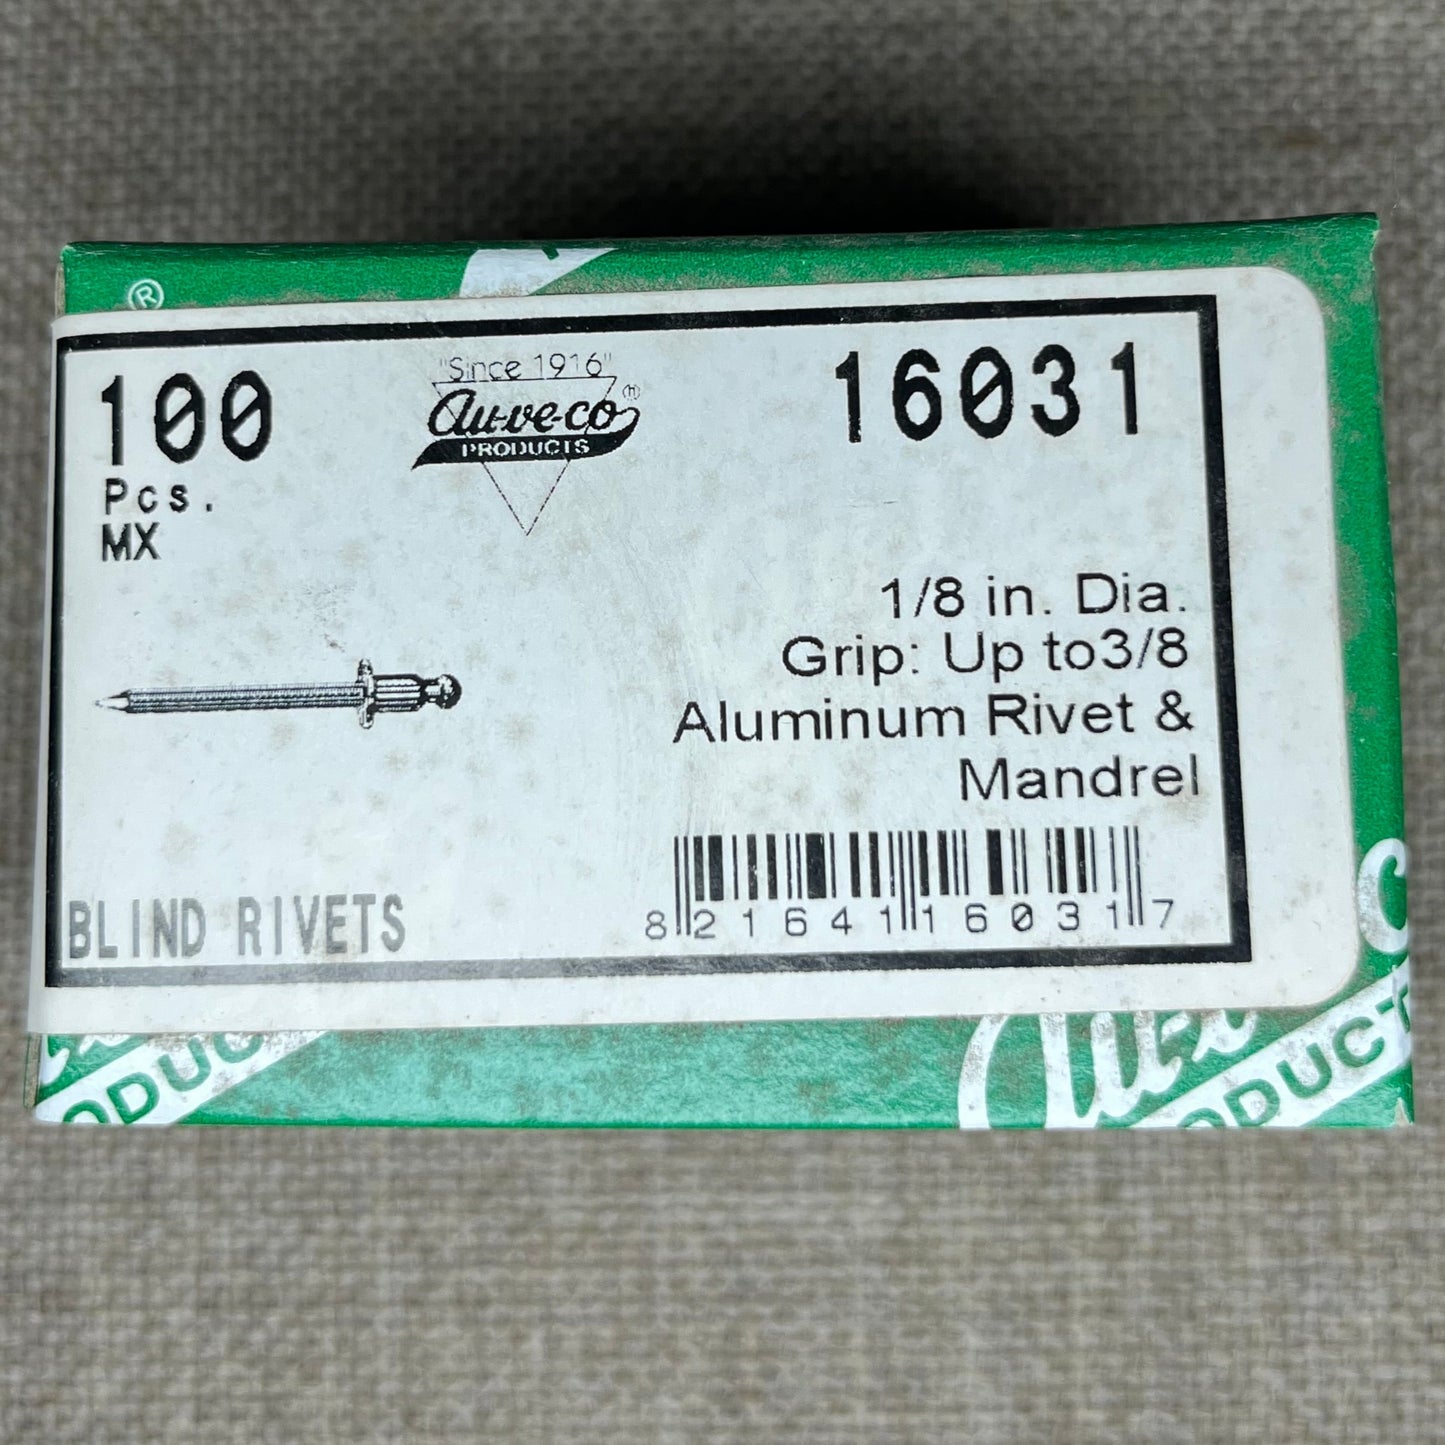 100 Blind Rivets Auveco 16031 Used For General Purpose and Any Automobile